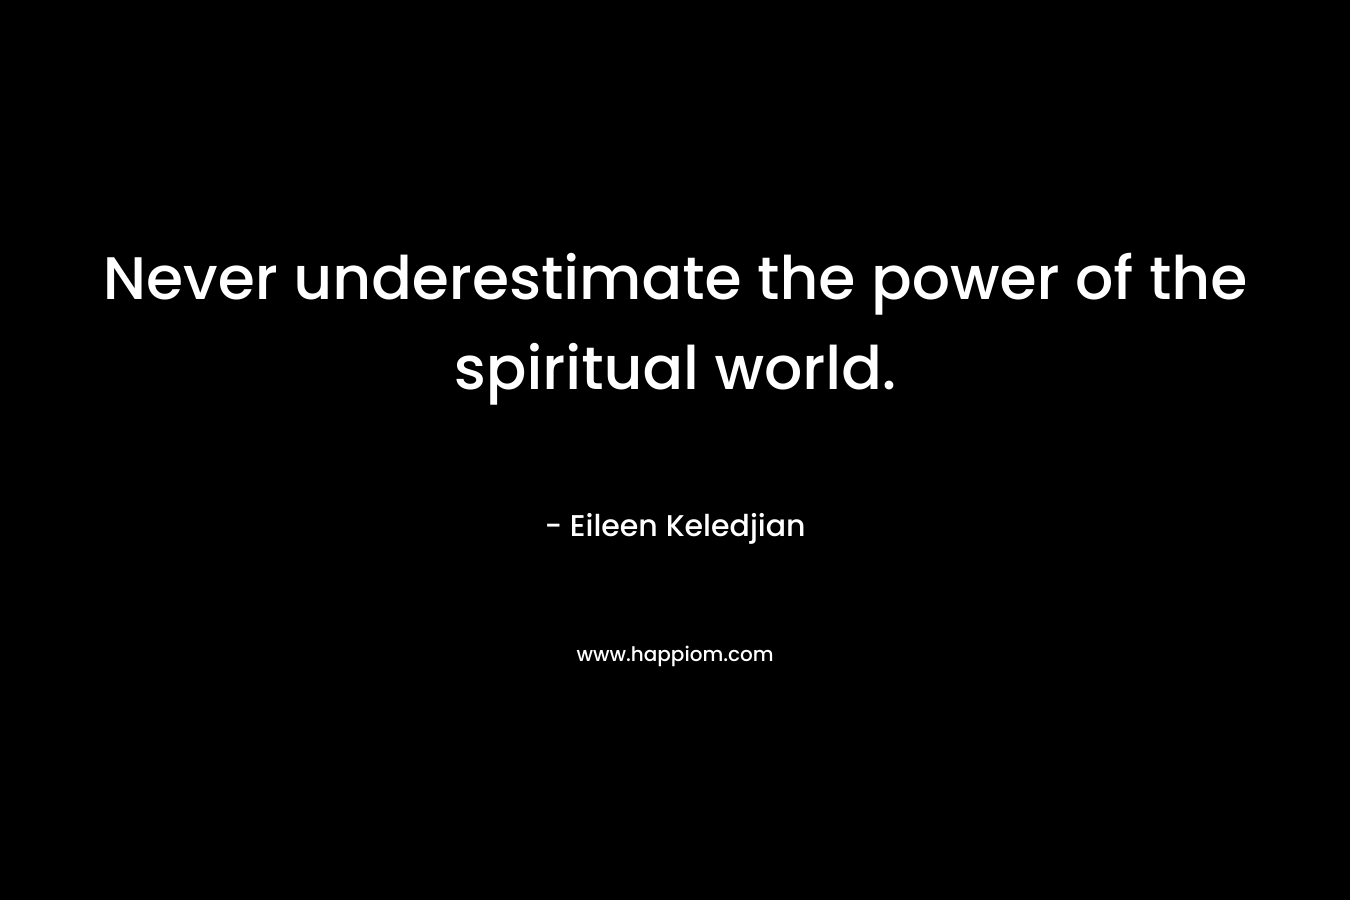 Never underestimate the power of the spiritual world.